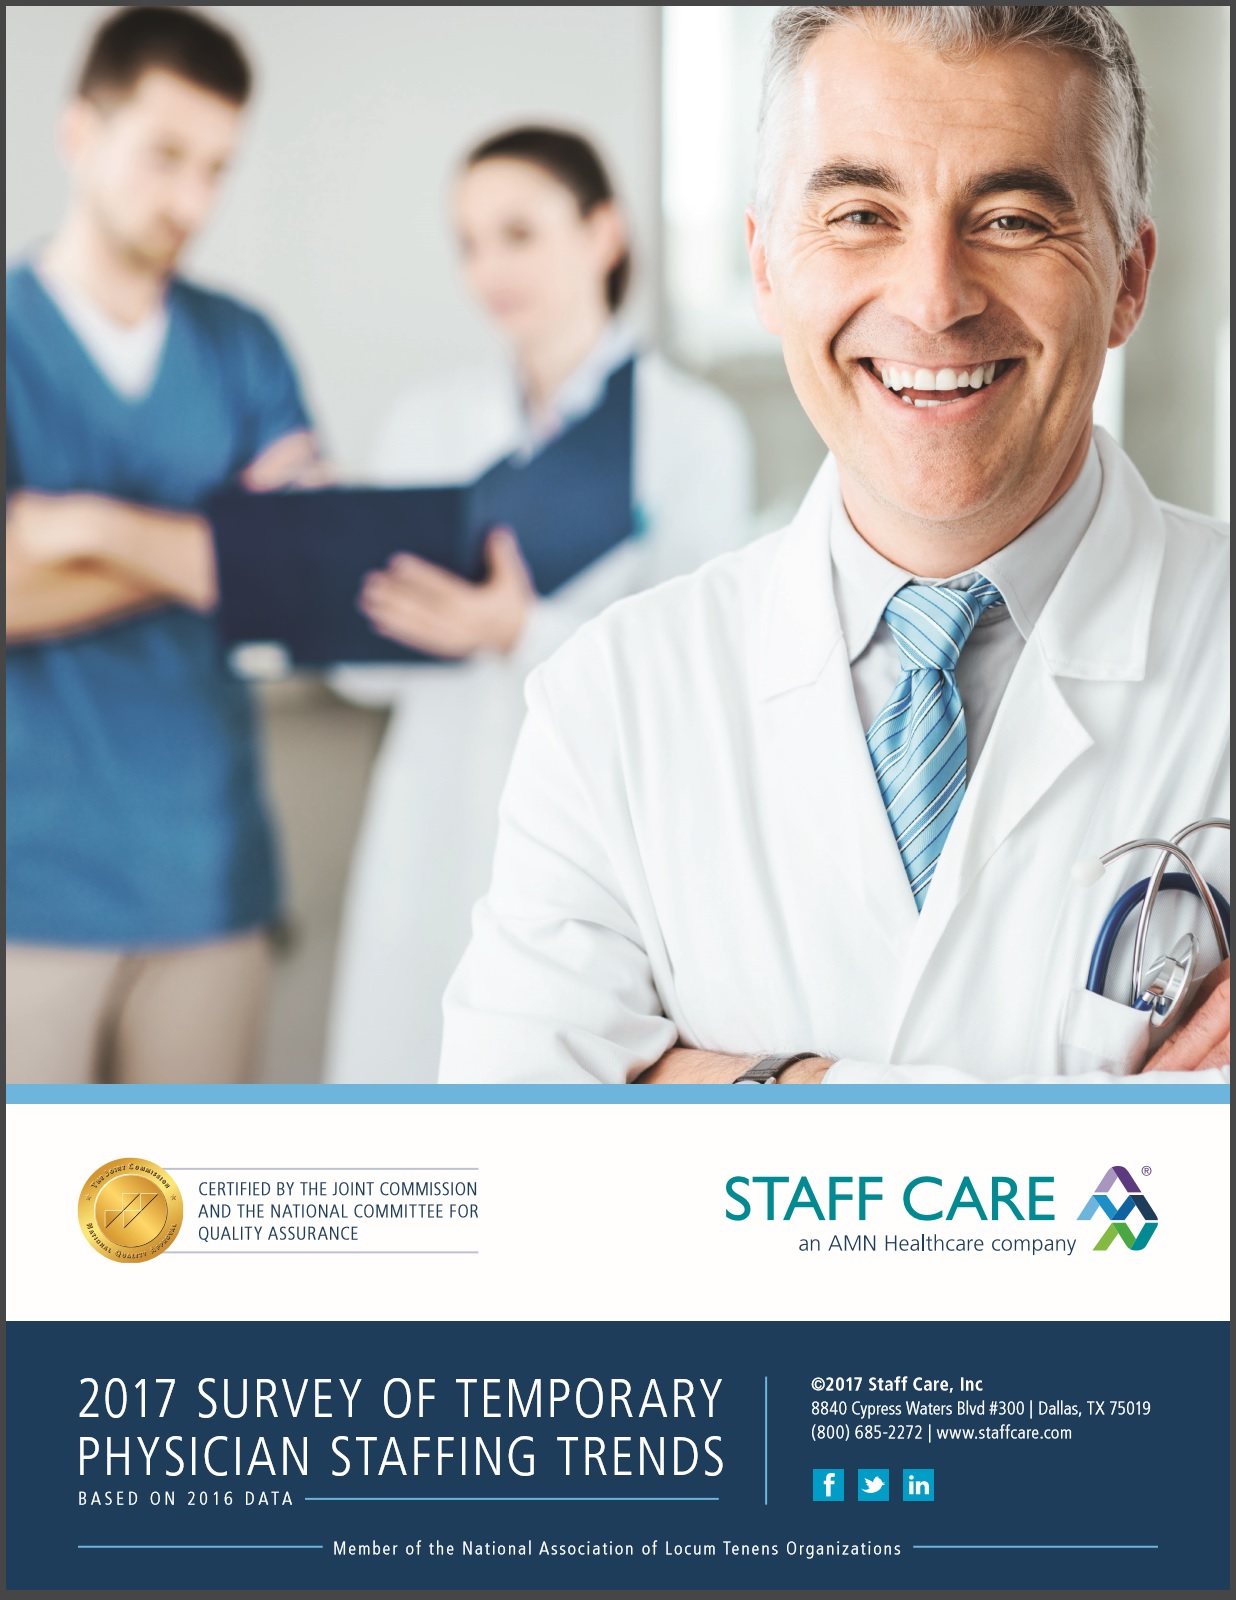 Staff Care's 2017 Survey of Temporary Physician Staffing Trends